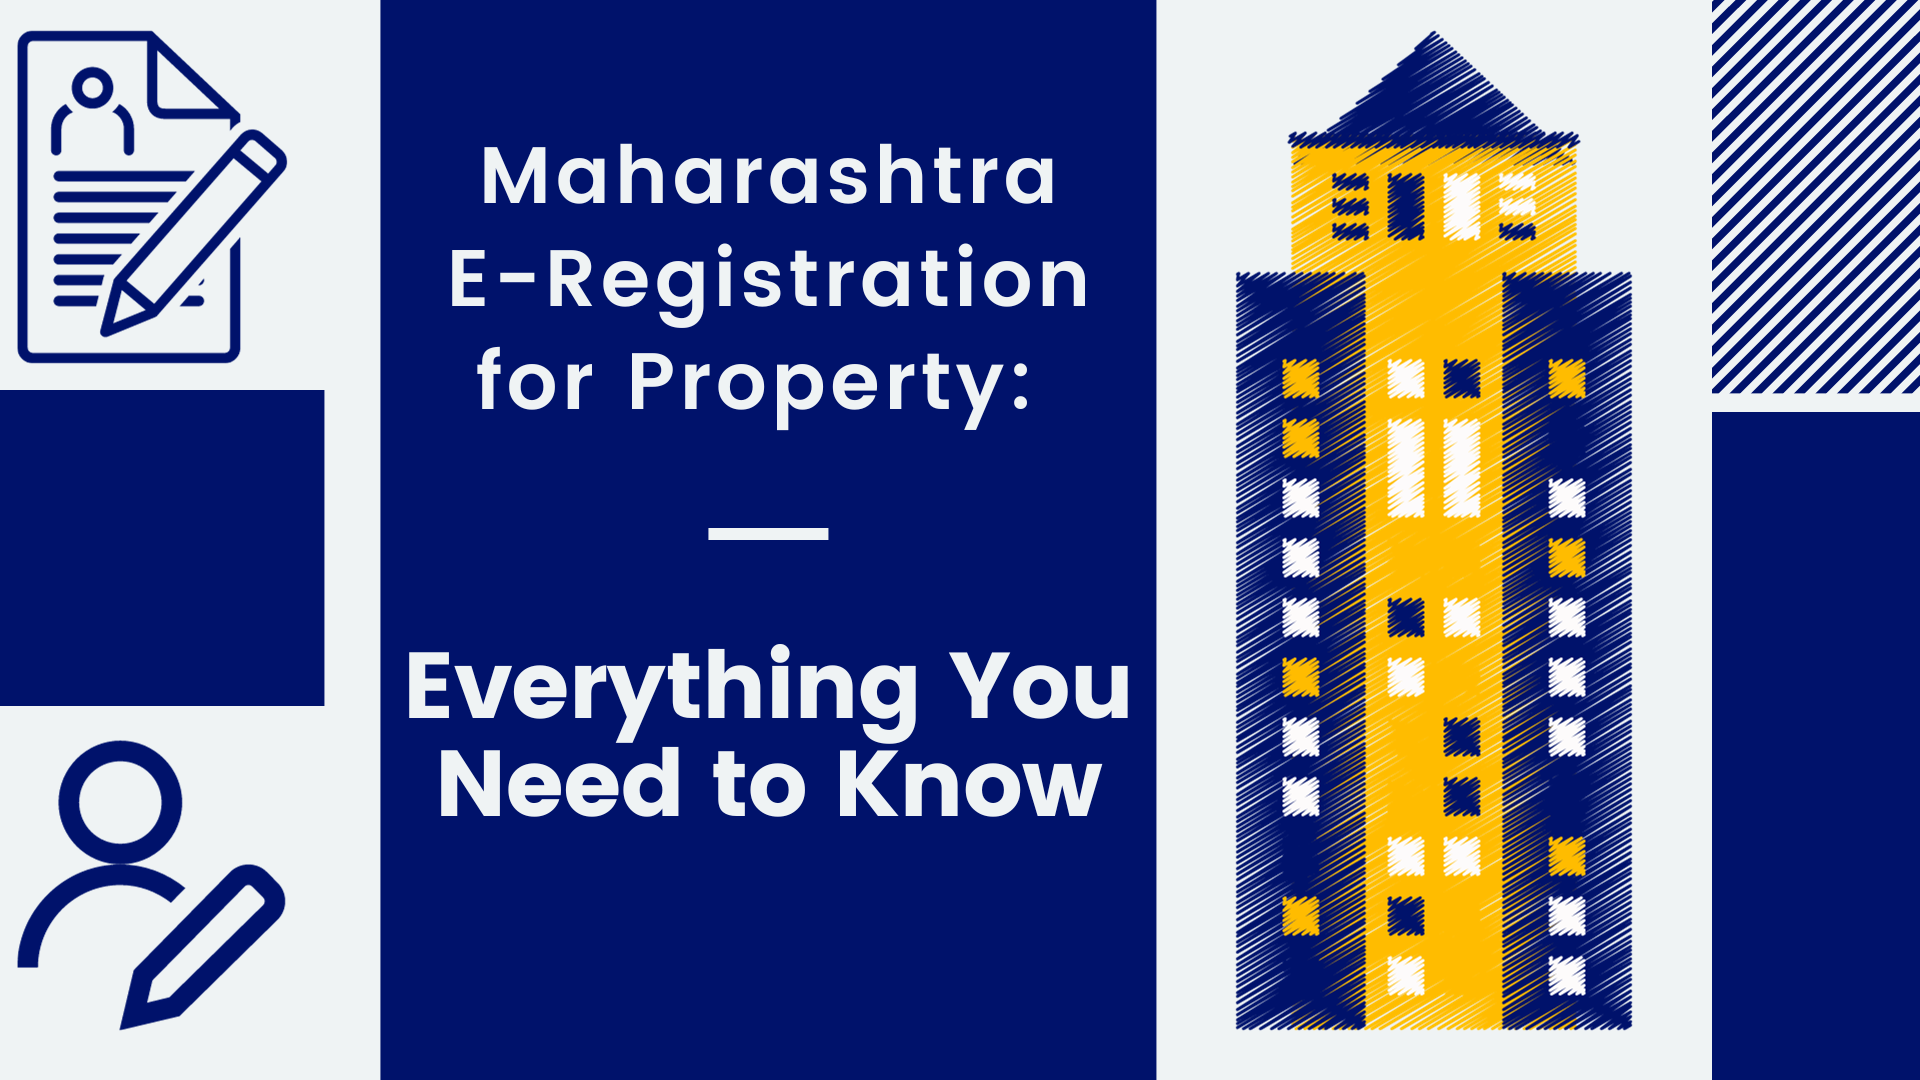 Maharashtra E-Registration for Property: Everything You Need to Know